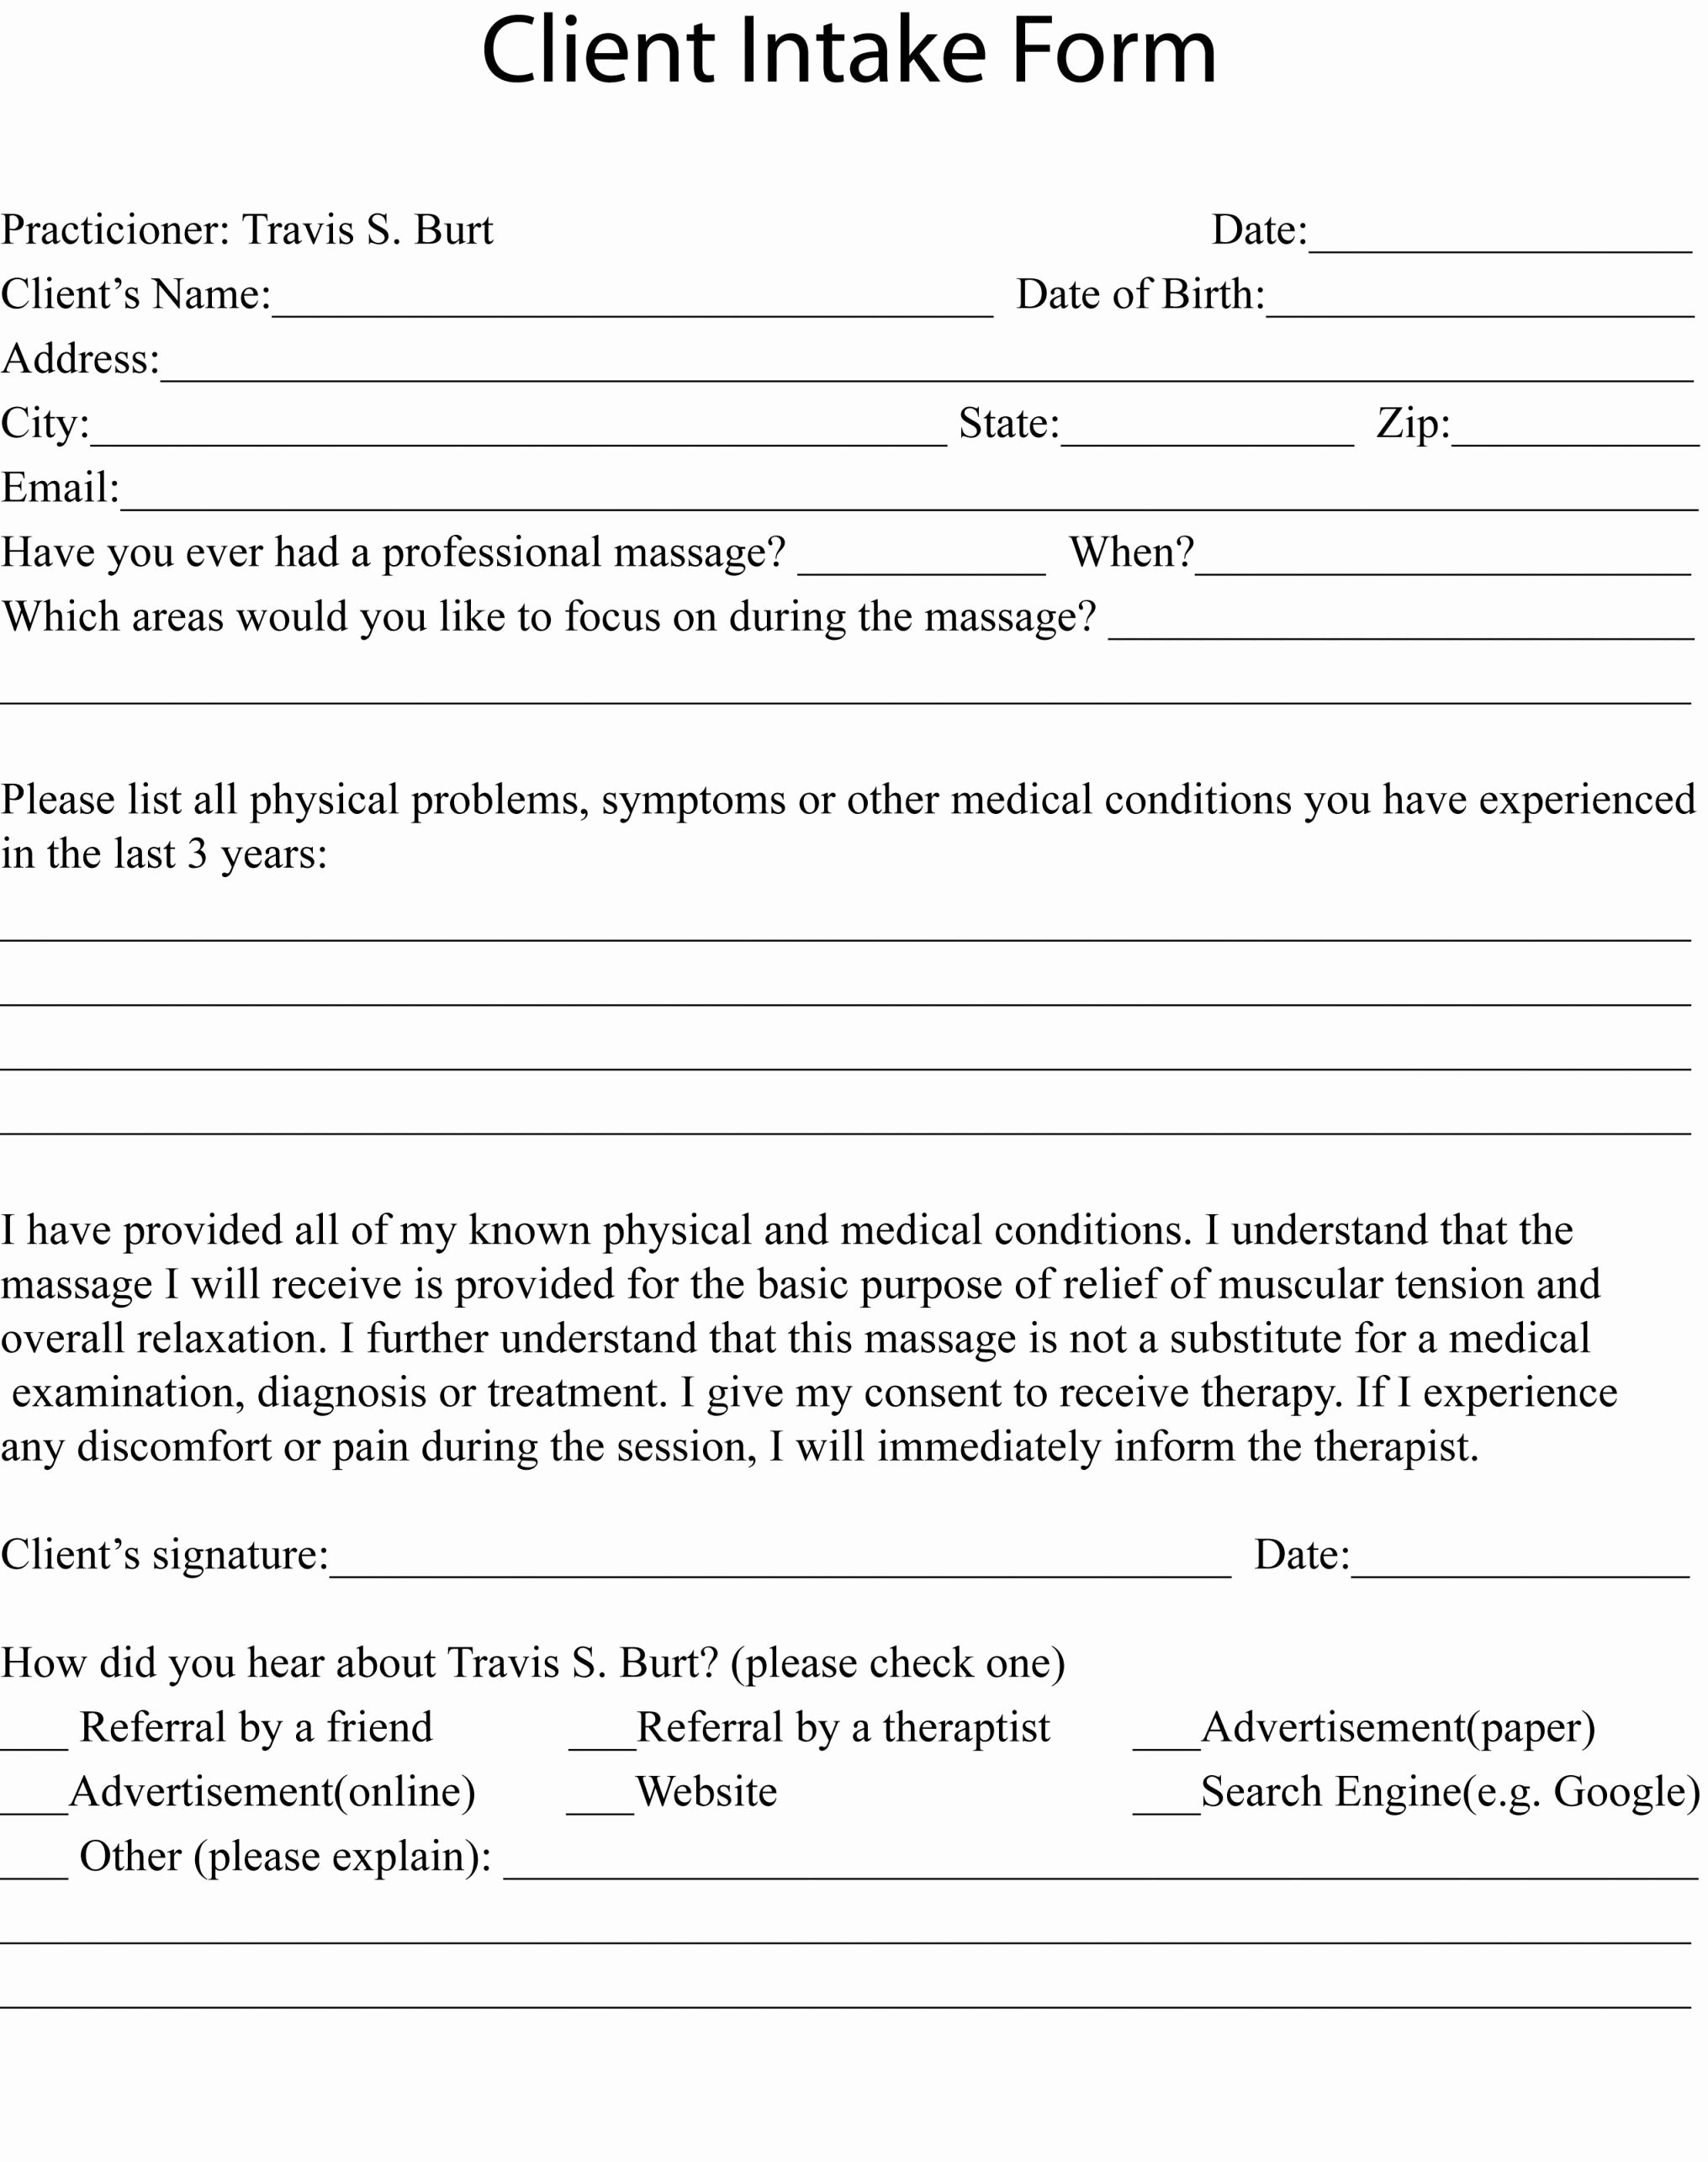 Medical Intake forms Template Awesome Esthetician Client Intake form